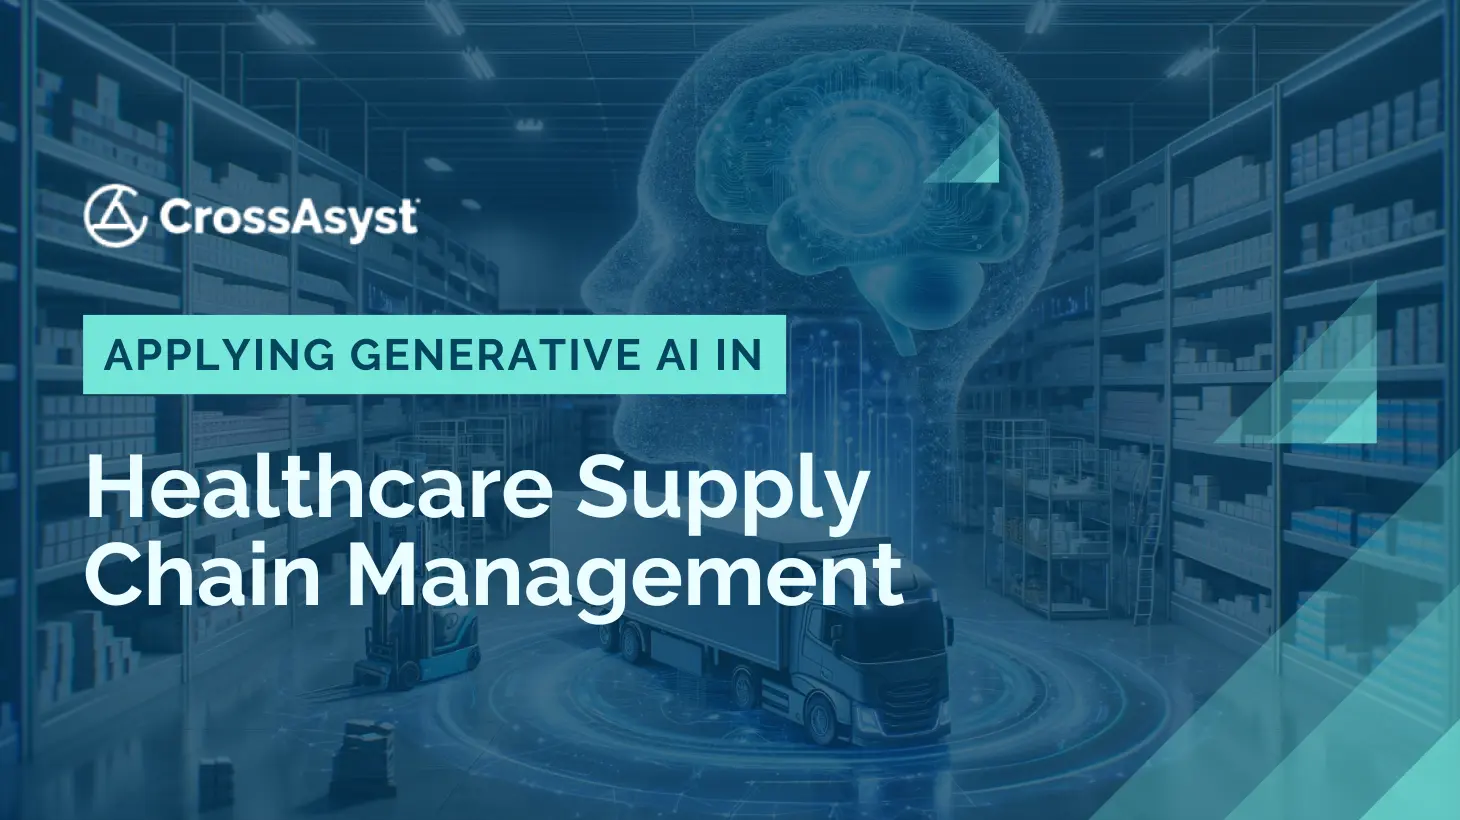 Applying Generative AI in Healthcare Supply Chain Management